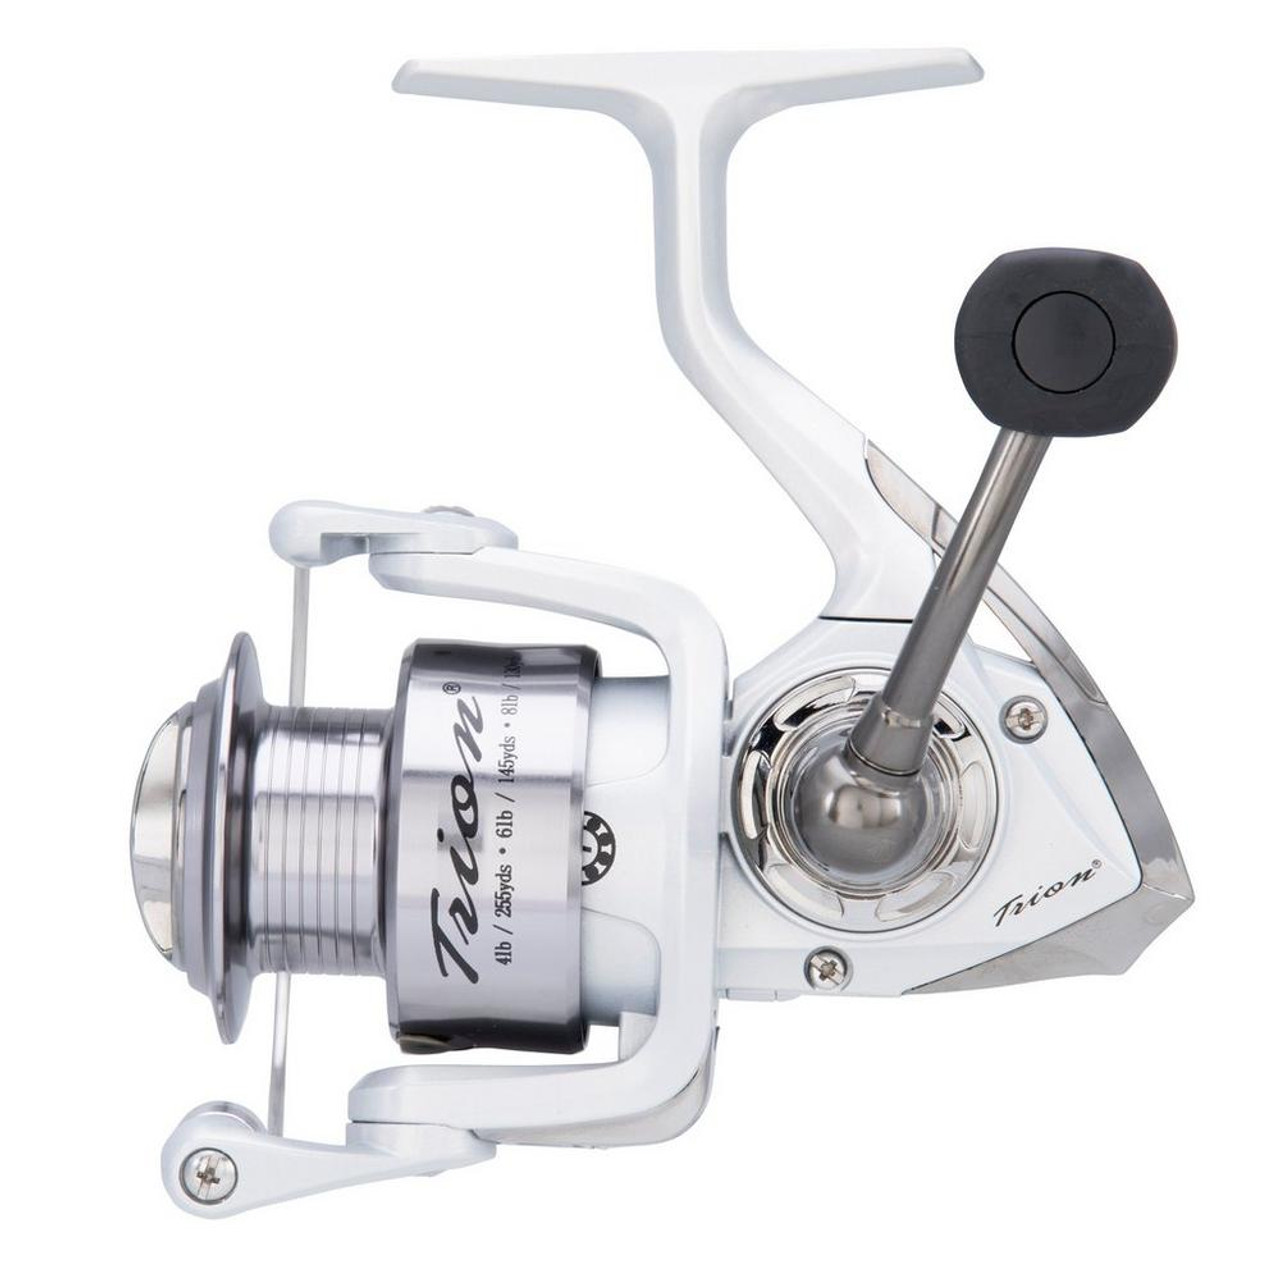 https://cdn11.bigcommerce.com/s-uv5can9due/images/stencil/1280x1280/products/30666/236693/Pflueger_Trion_Spinning_Reel_30_2019_alt3__75210.1635953505.jpg?c=2